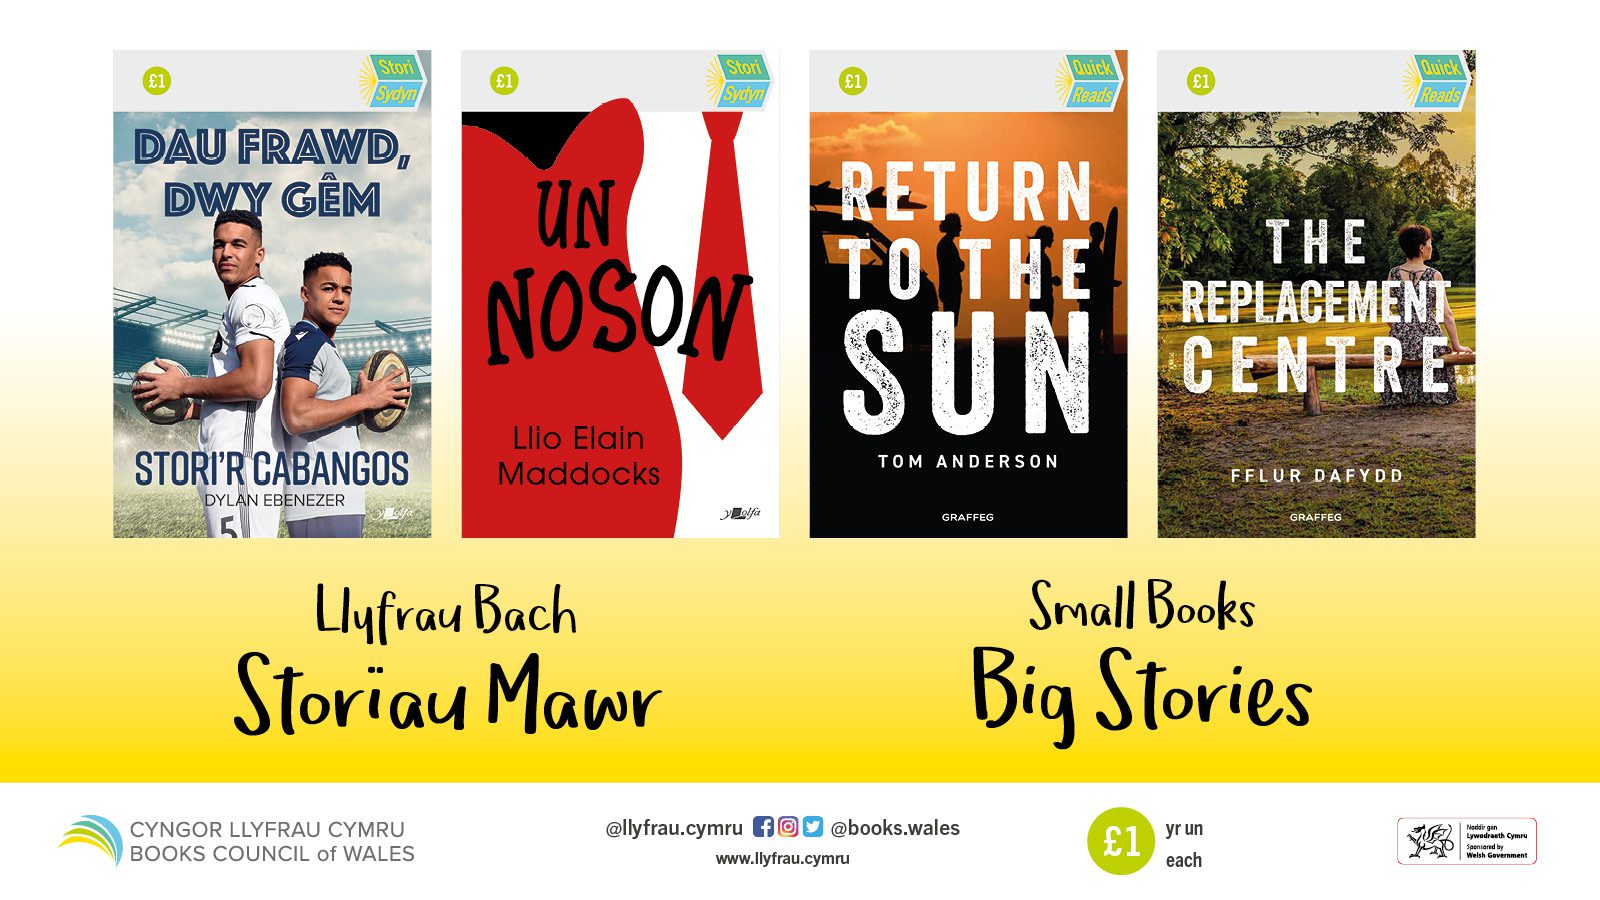 The covers of the four books published in the 2020 Quick Reads series in Wales